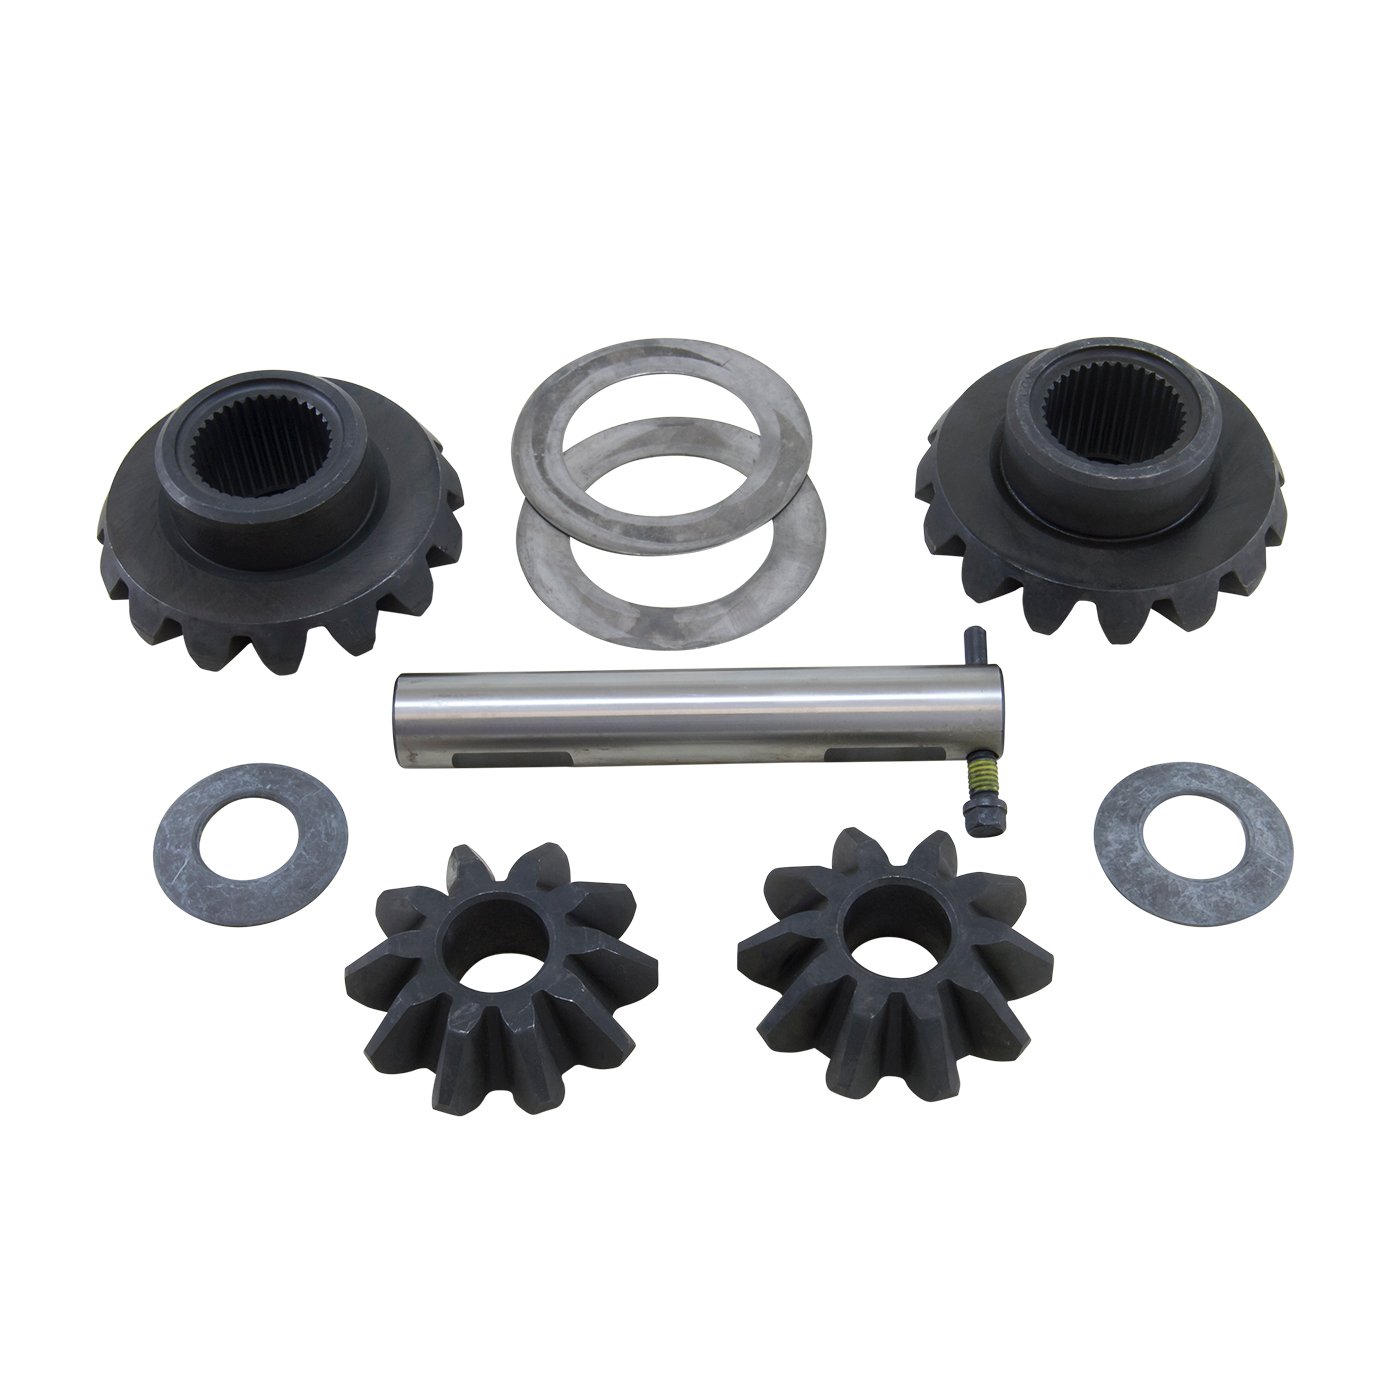 Standard Open Spider Gear Kit For 10.25 in. & 10.5 in. Ford With 35 Spline Axles